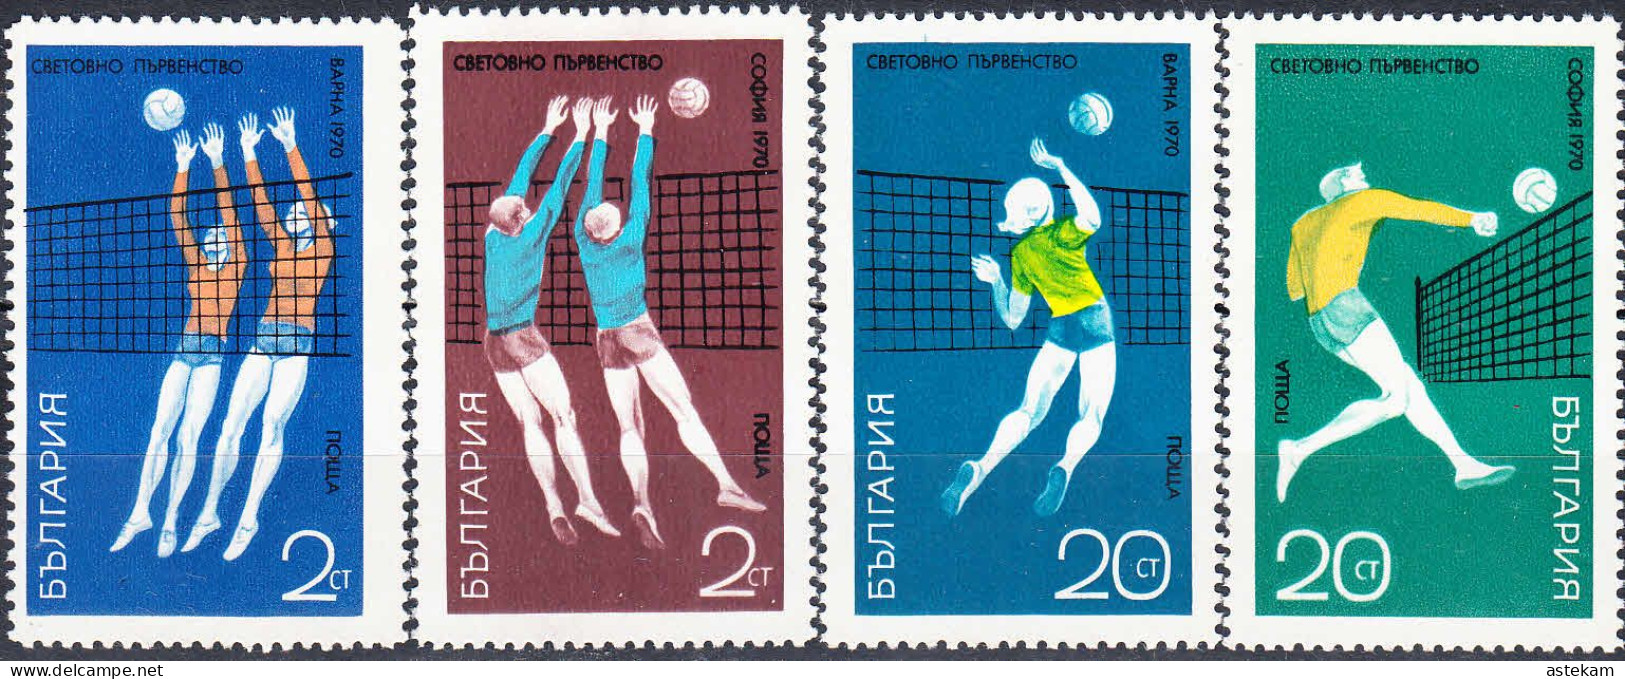 BULGARIA 1970, SPORT, WORLD VOLLEYBALL CHAMPIONSHIP For MEN And WOMEN In SOFIA, COMPLETE MNH SERIES With GOOD QUALITY*** - Neufs